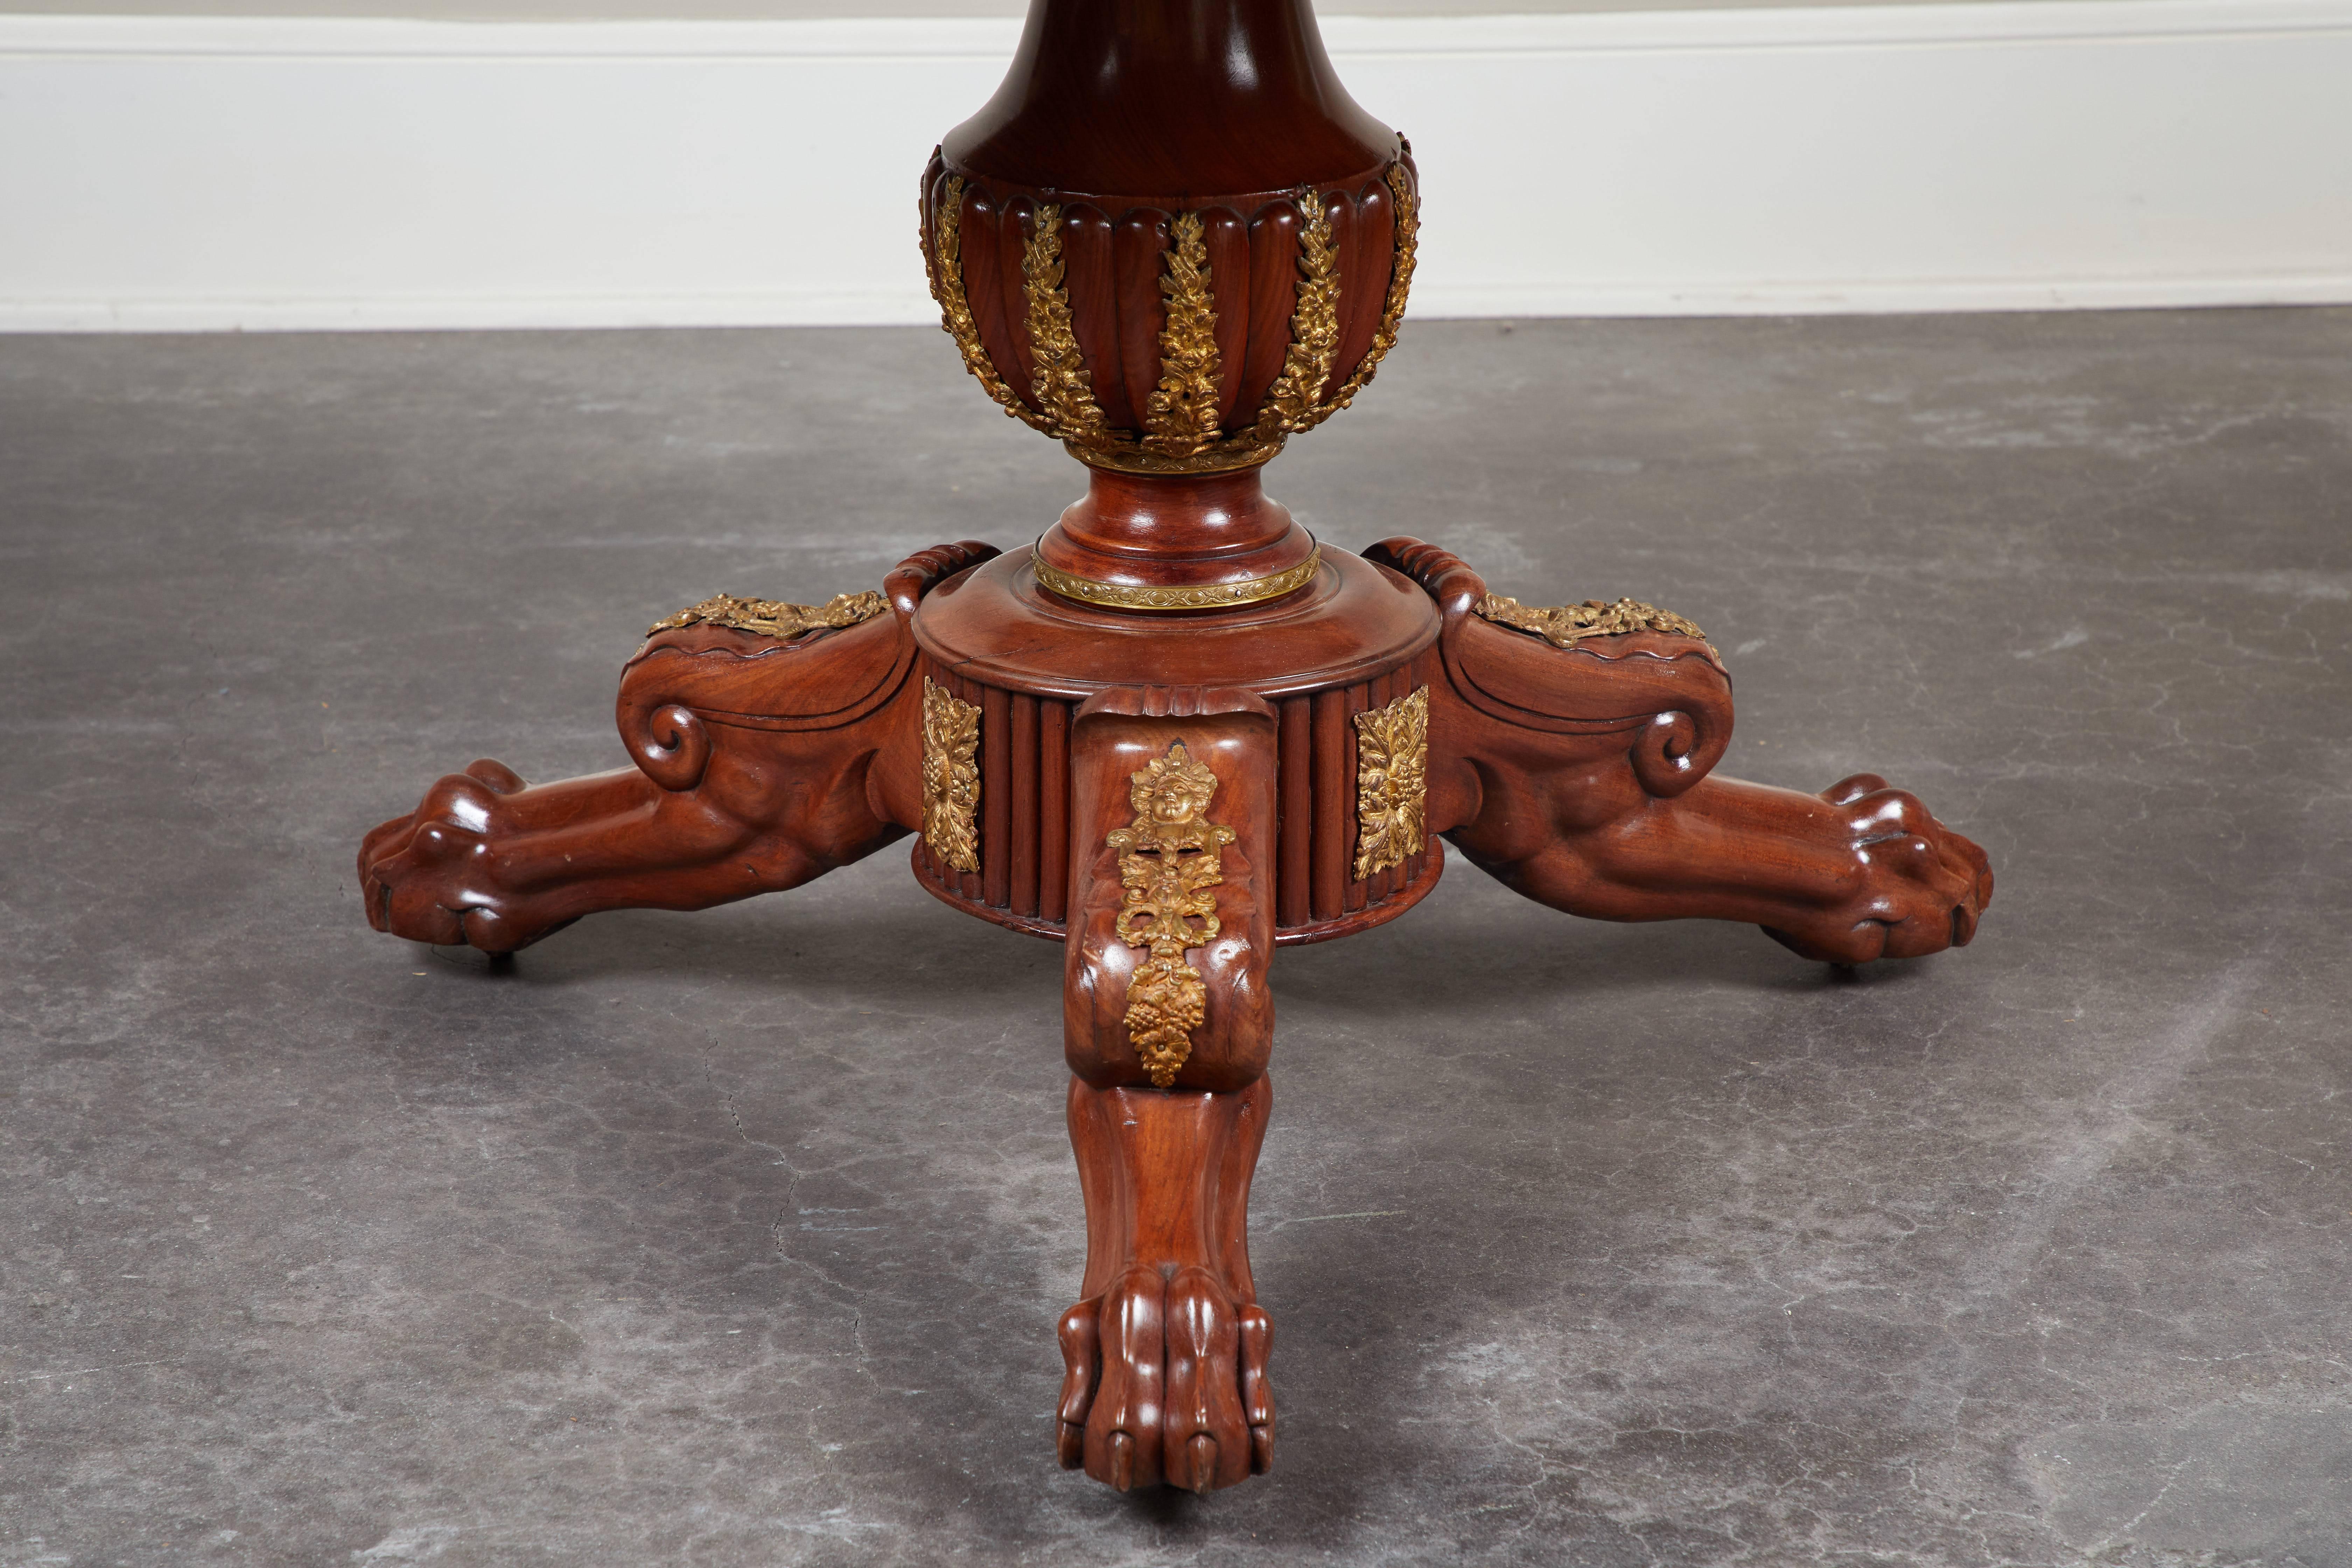 An early 19th century French Empire mahogany pedestal table. Features ormolu details, a black granite top with beveled lip, and urn-shaped base.